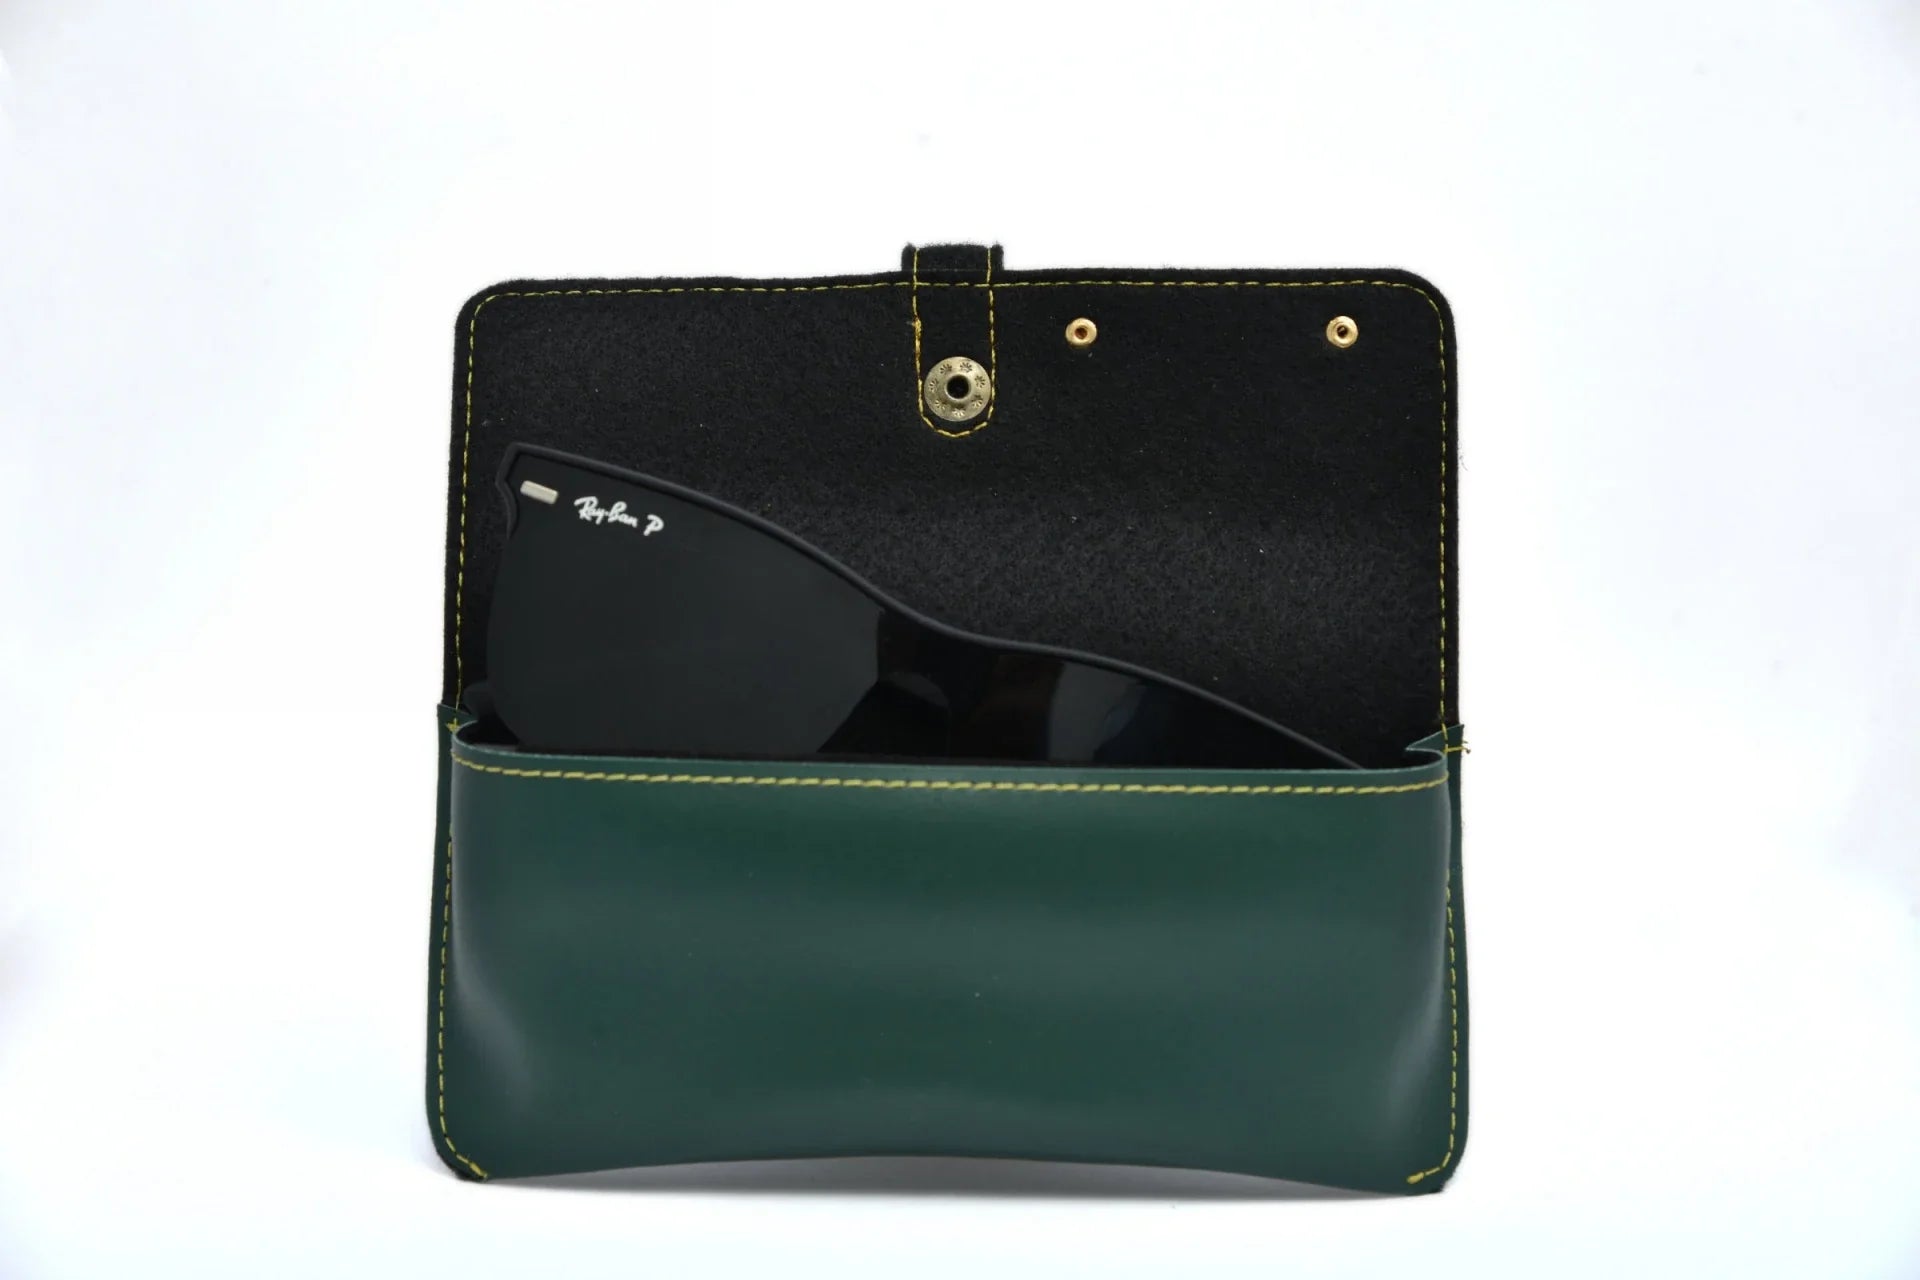 Inside or open view of olive green sunglasses case